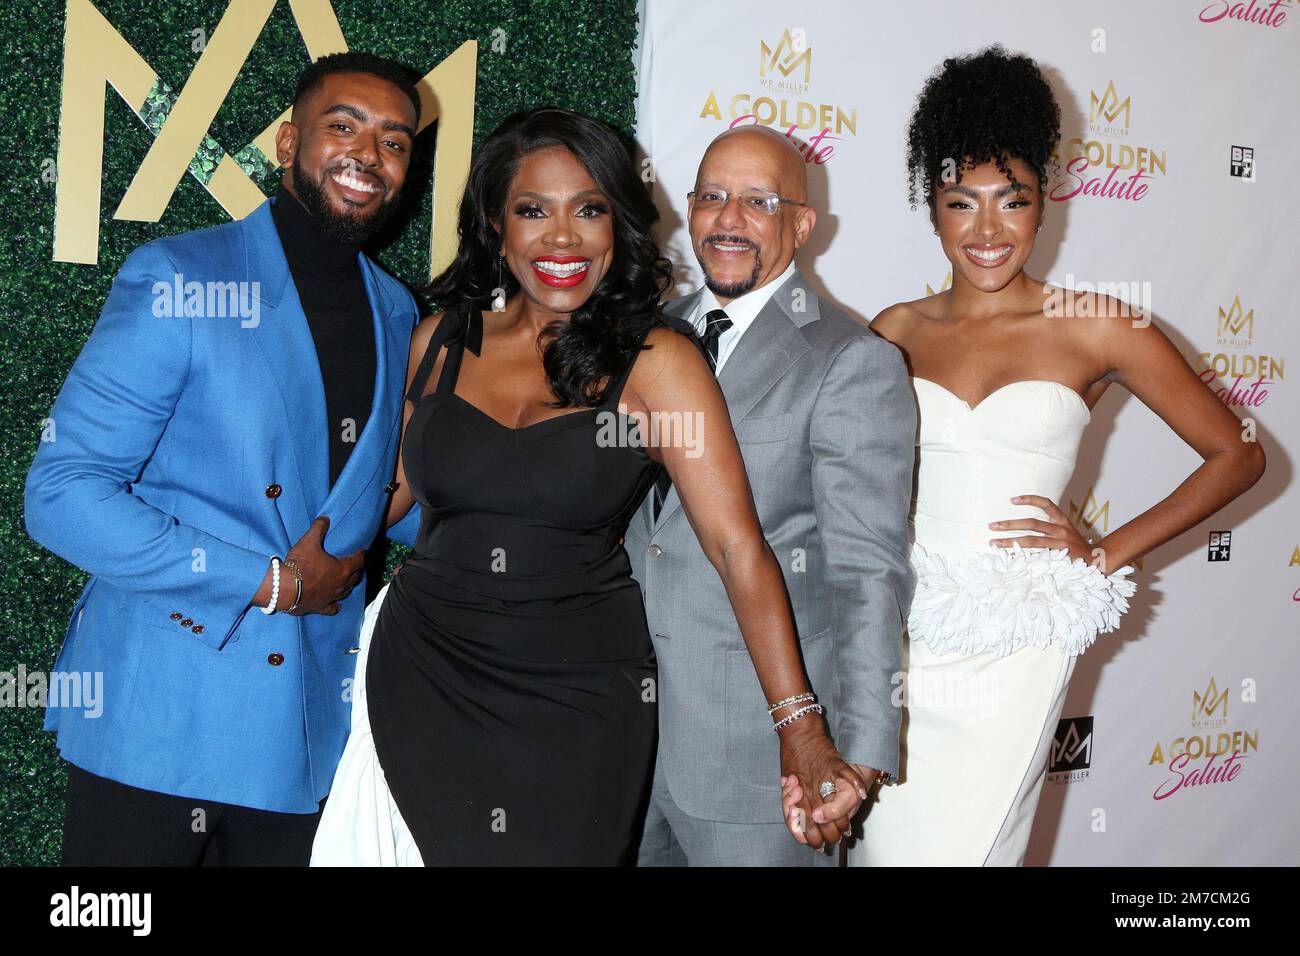 Marina Del Rey, USA. 08th Jan, 2023. LOS ANGELES - JAN 8: Etienne Maurice, Sheryl Lee Ralph, Vincent Hughes, Ivy-Victoria Maurice at A Golden Salute to Sheryl Lee Ralph and Niecy Nash-Betts at the Ritz Carlton Hotel on January 8, 2023 in Marina Del Rey, CA (Photo by Katrina Jordan/Sipa USA) Credit: Sipa USA/Alamy Live News Stock Photo